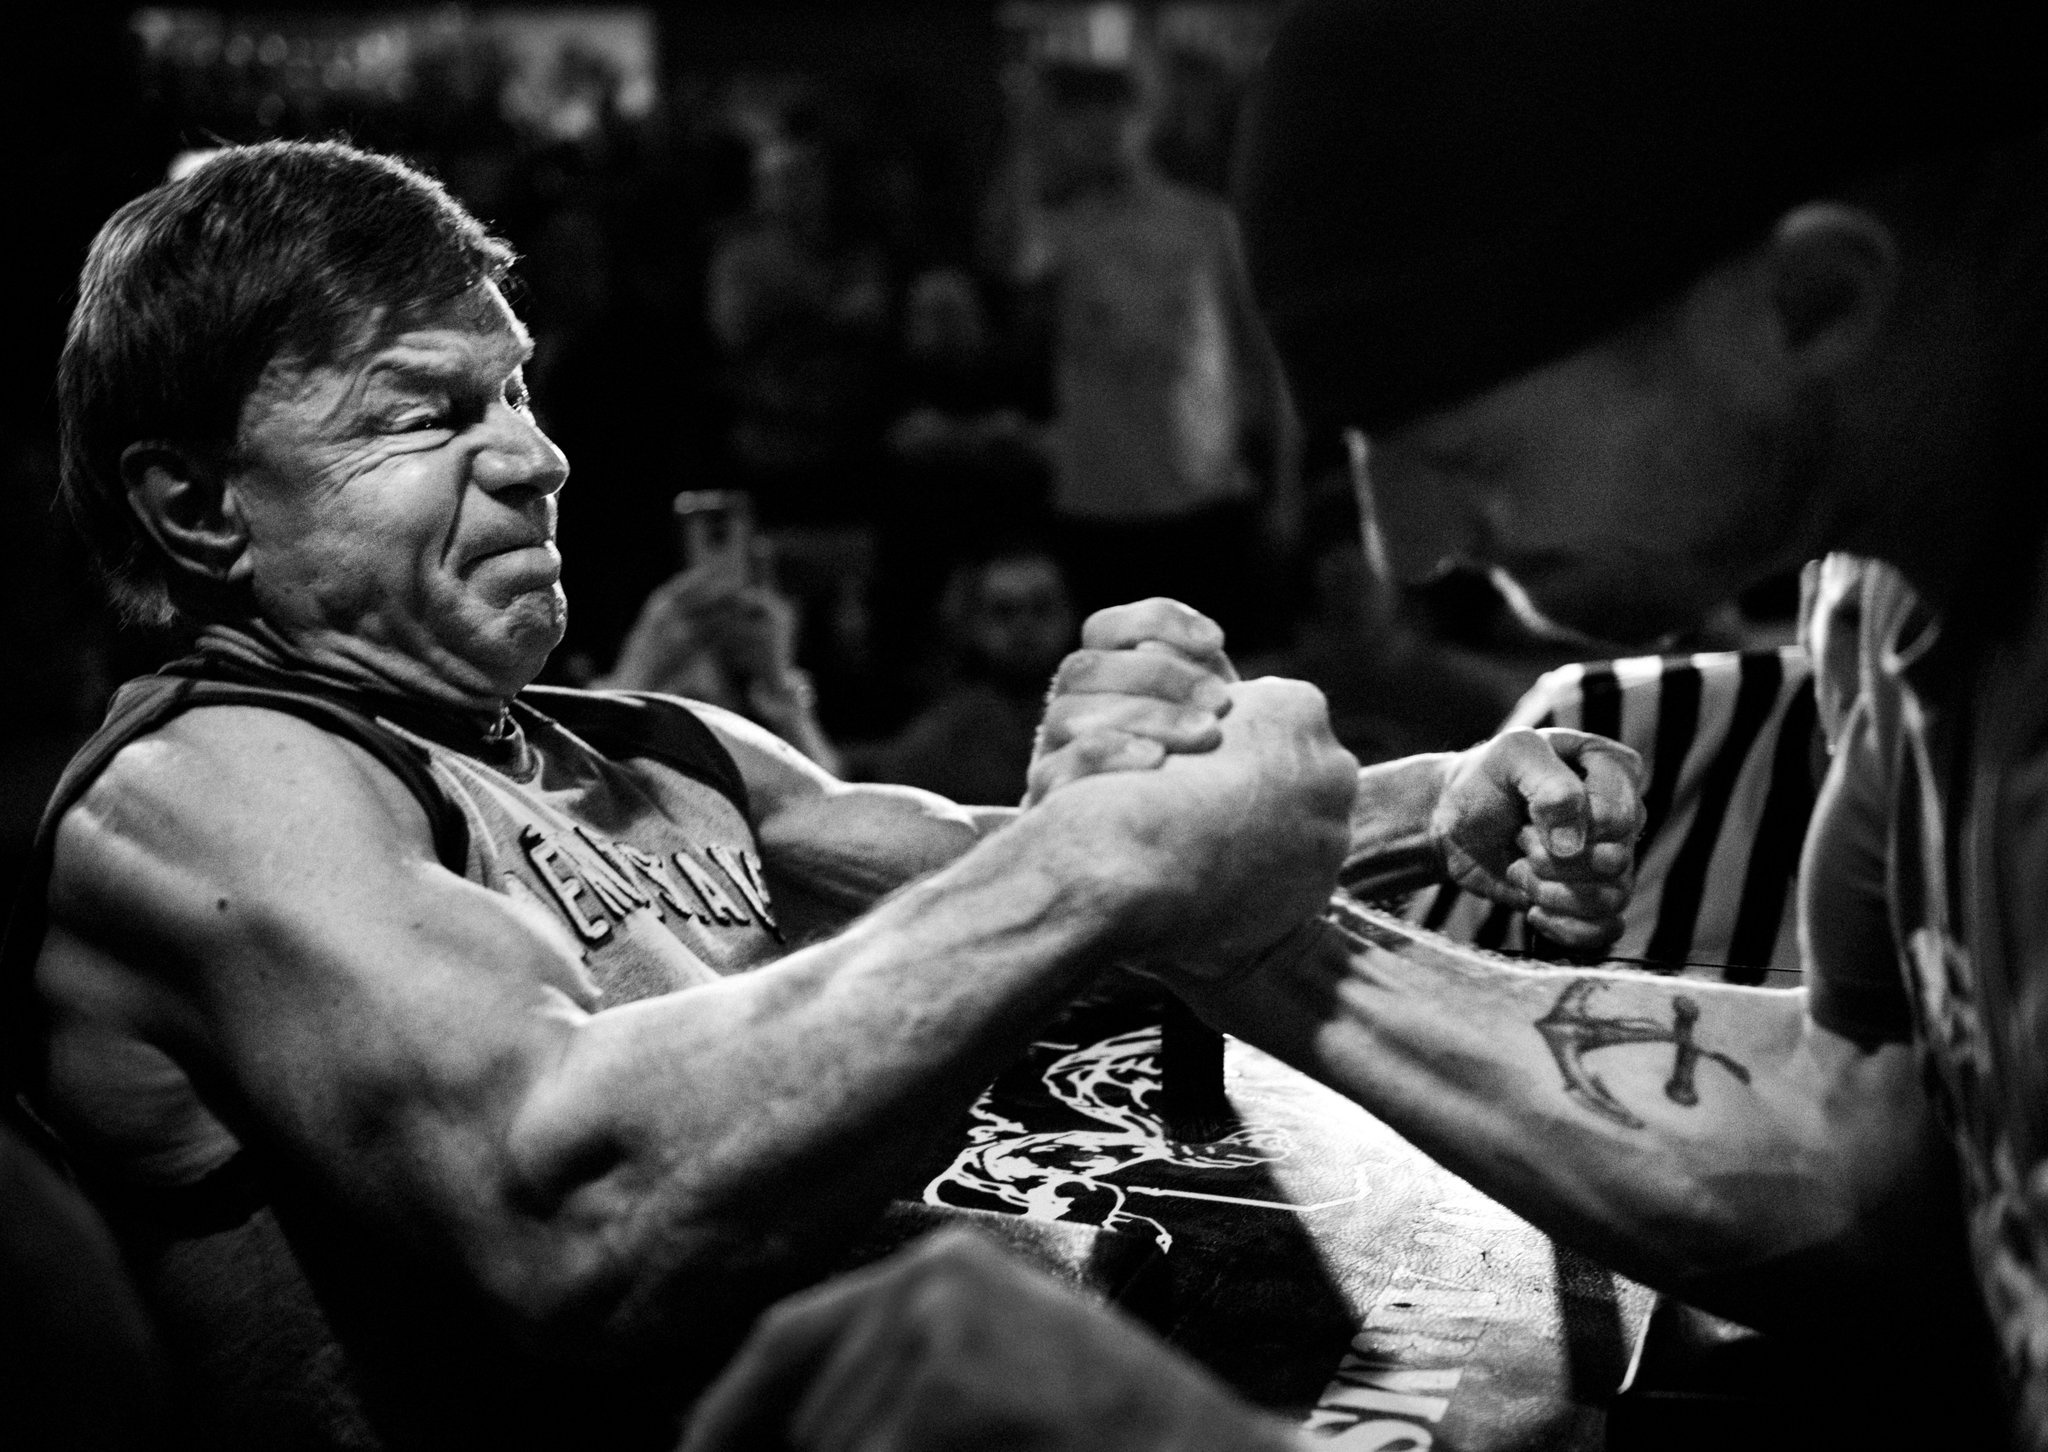 Arm Wrestling: Norm Devio, 75-Year-Old Arm Wrestler, Sports Competition and Event, Wrist Wrestling. 2050x1460 HD Wallpaper.